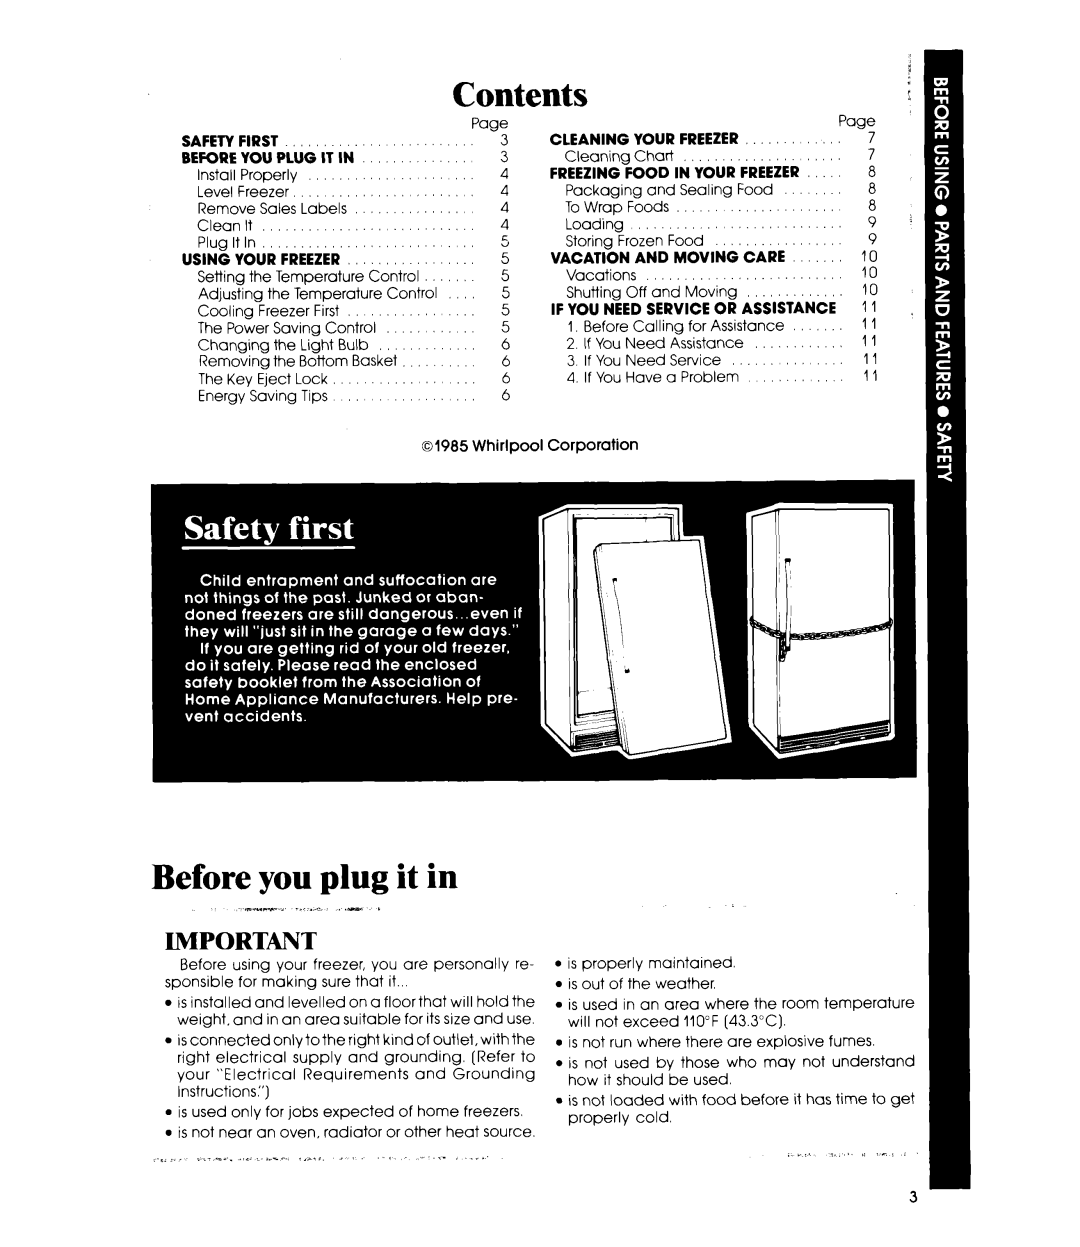 Whirlpool EV150F manual Contents, Before you plug it in, Safetyfirst Beforeyou Plug It In, Using Your Freezer 